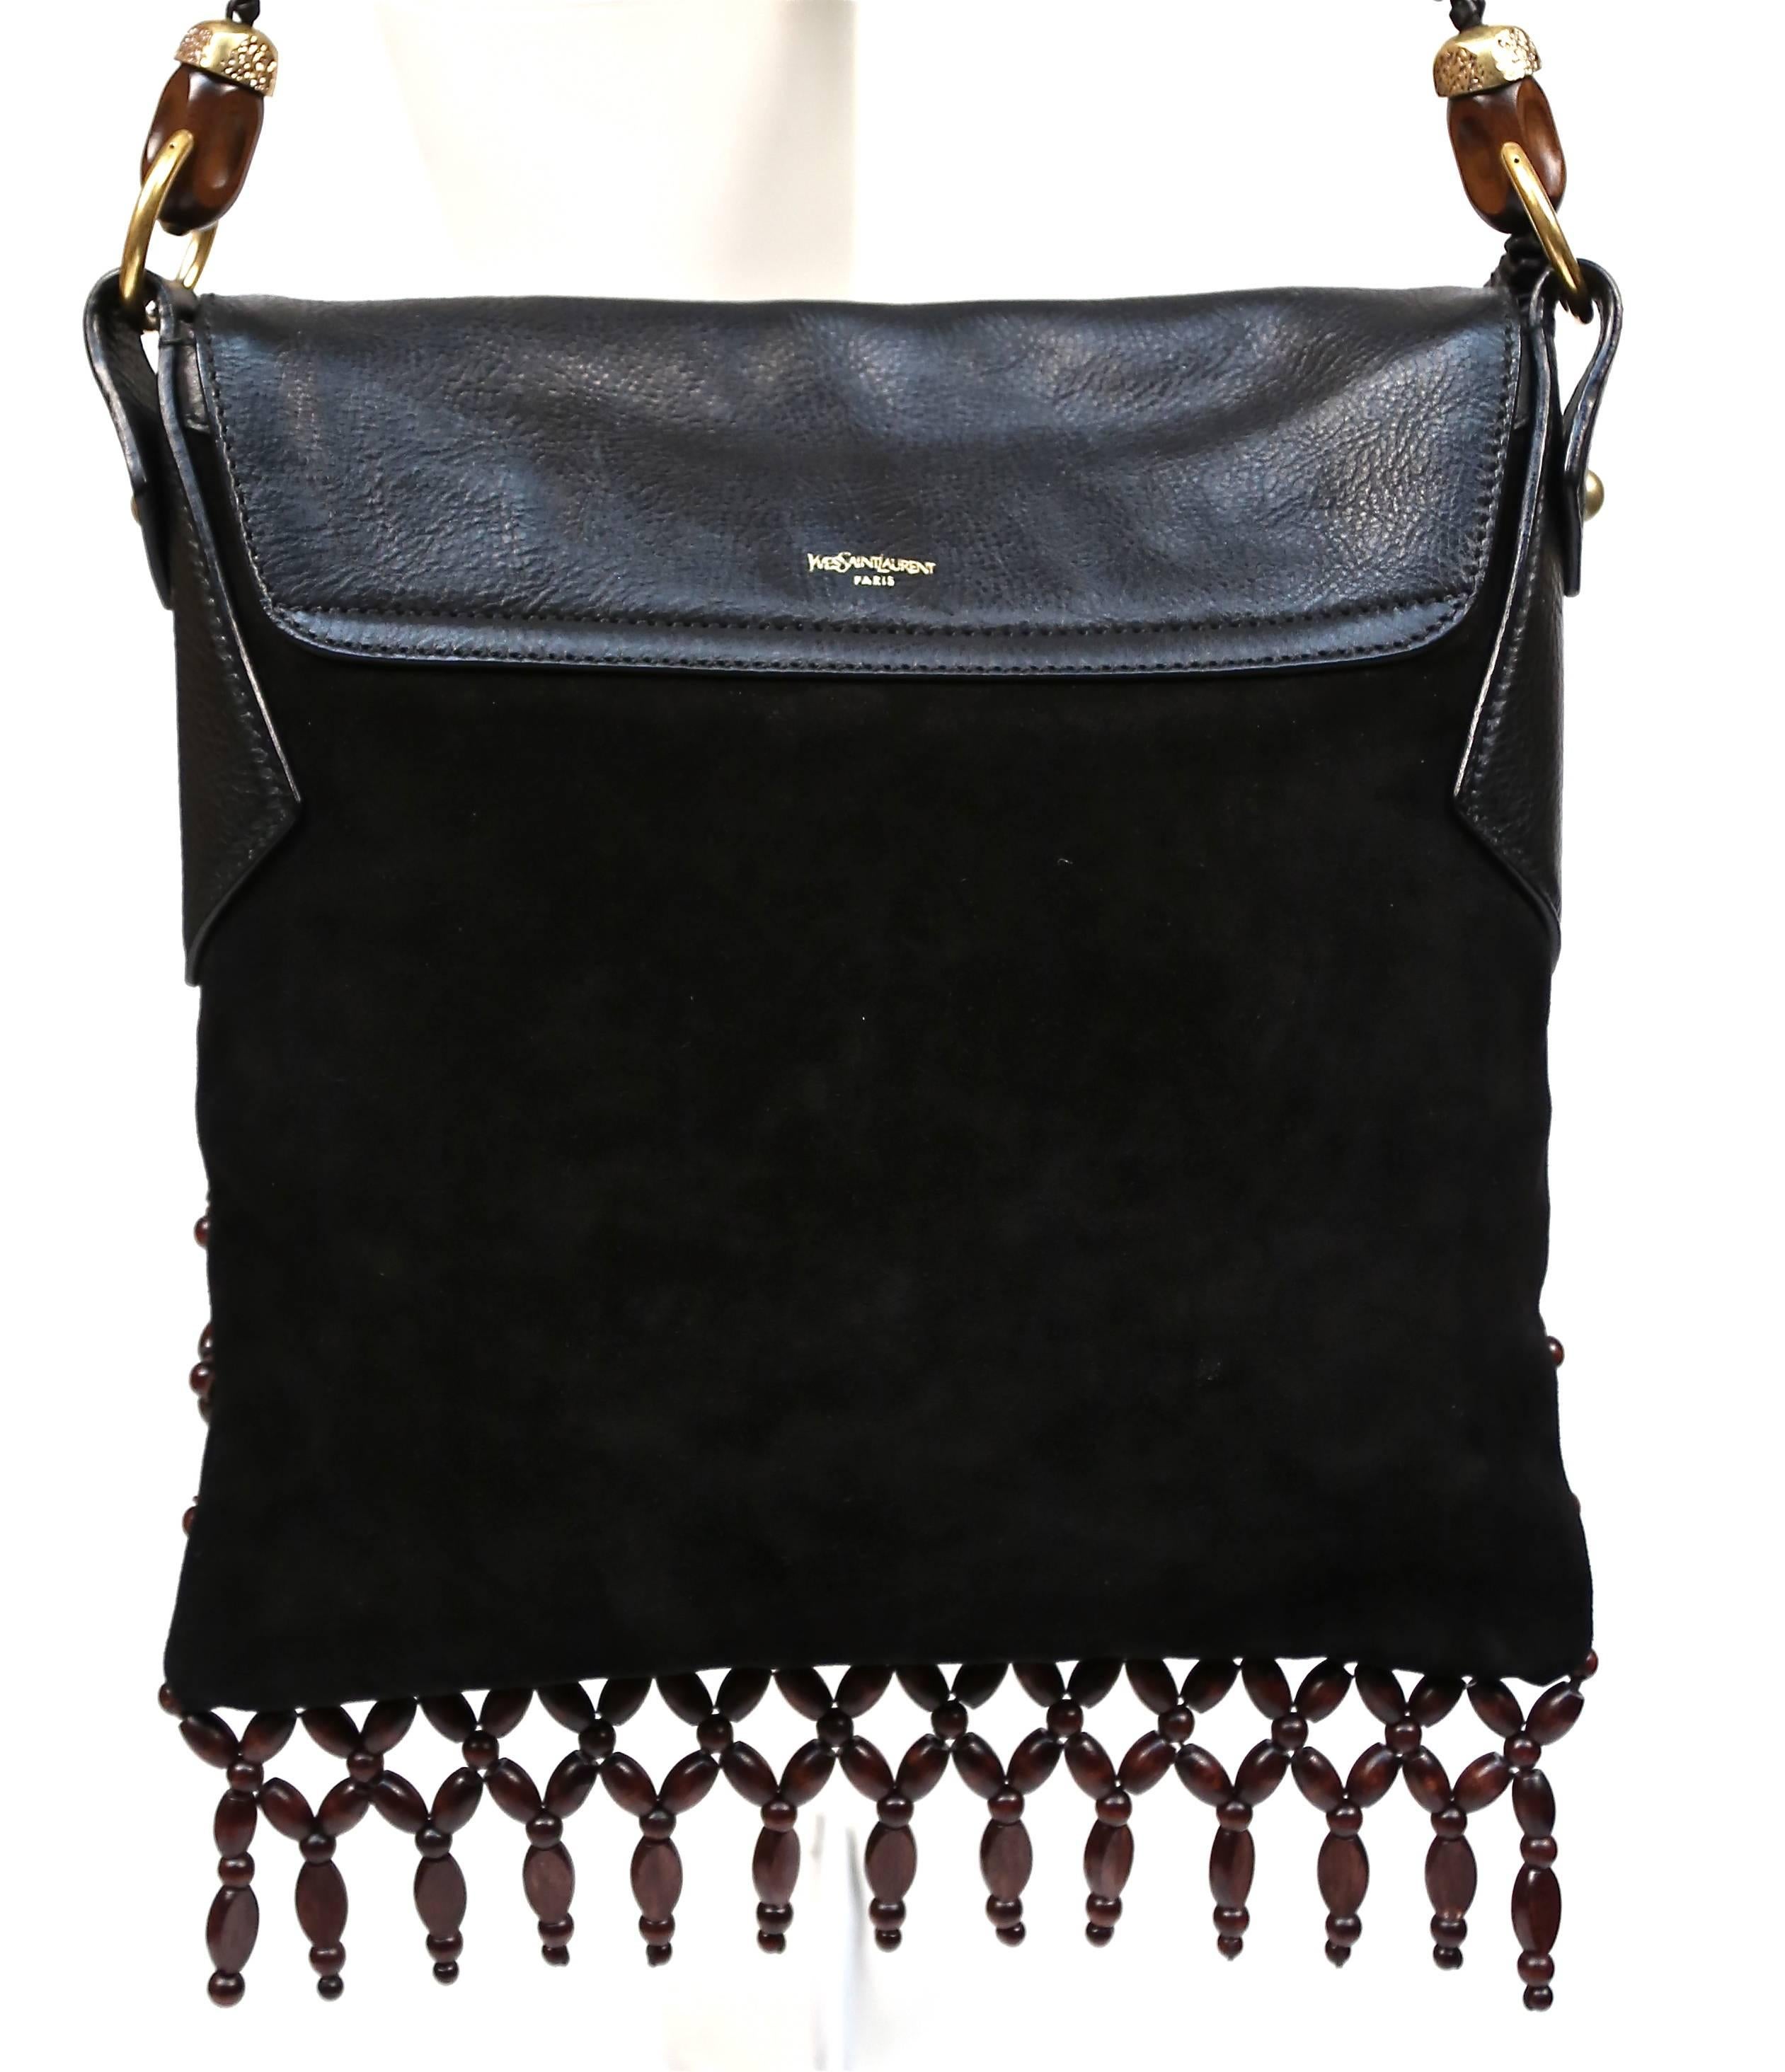 Very interesting, black suede and leather handbag with brown wooden beading and brass hardware from Yves Saint Laurent dating to the 2005 as designed by Tom Ford for Yves Saint Laurent. Approximate measurements: 12